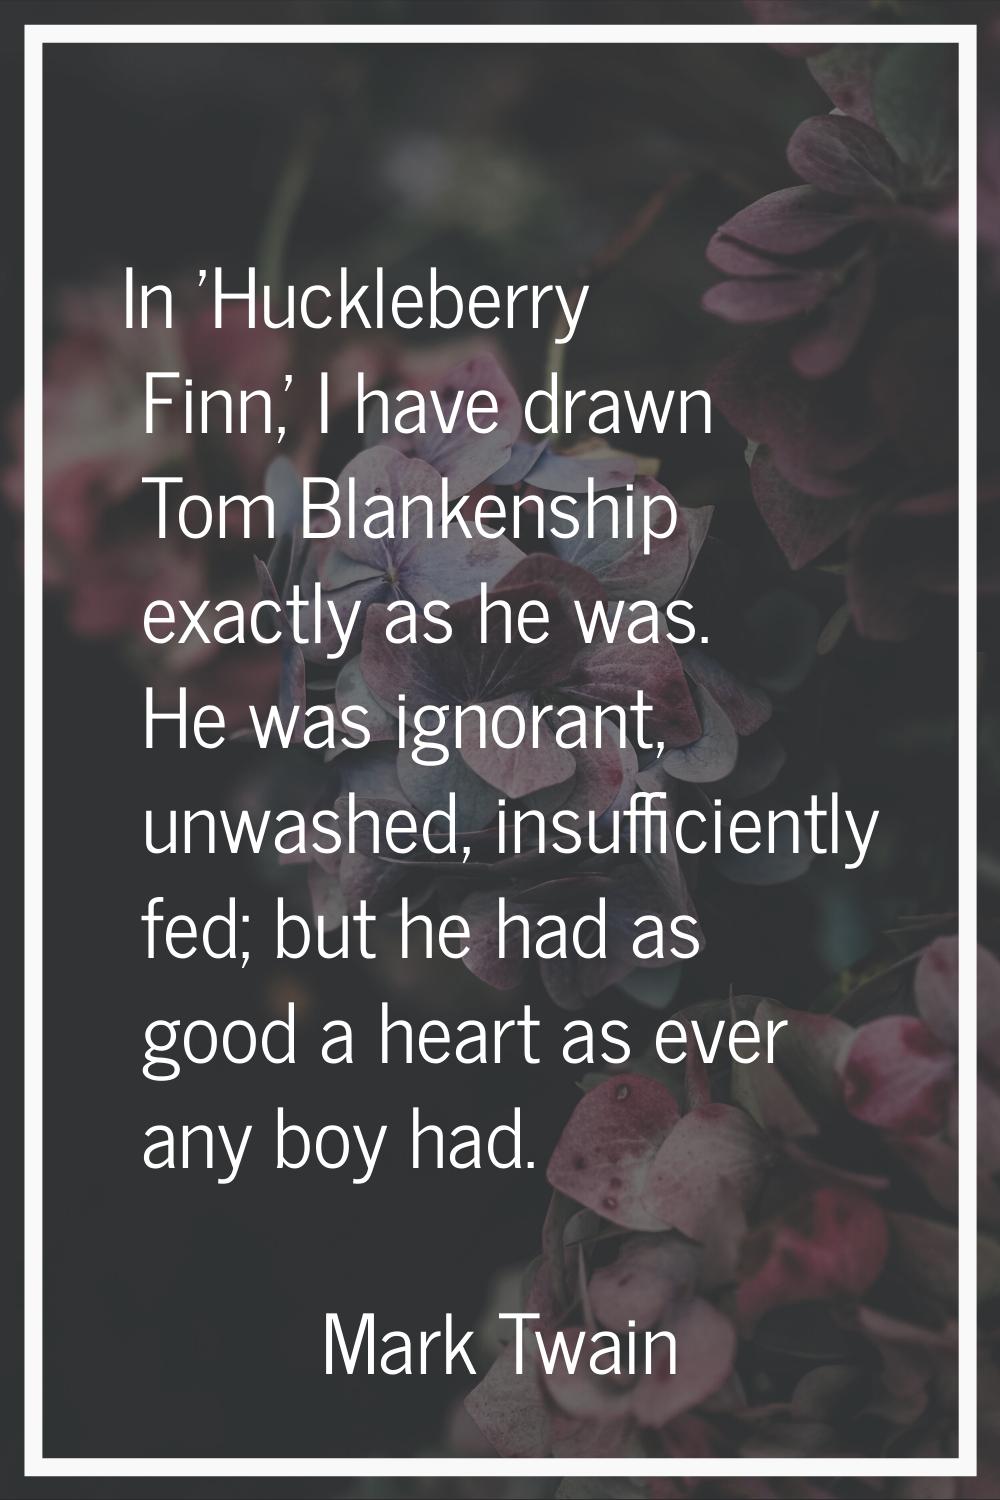 In 'Huckleberry Finn,' I have drawn Tom Blankenship exactly as he was. He was ignorant, unwashed, i